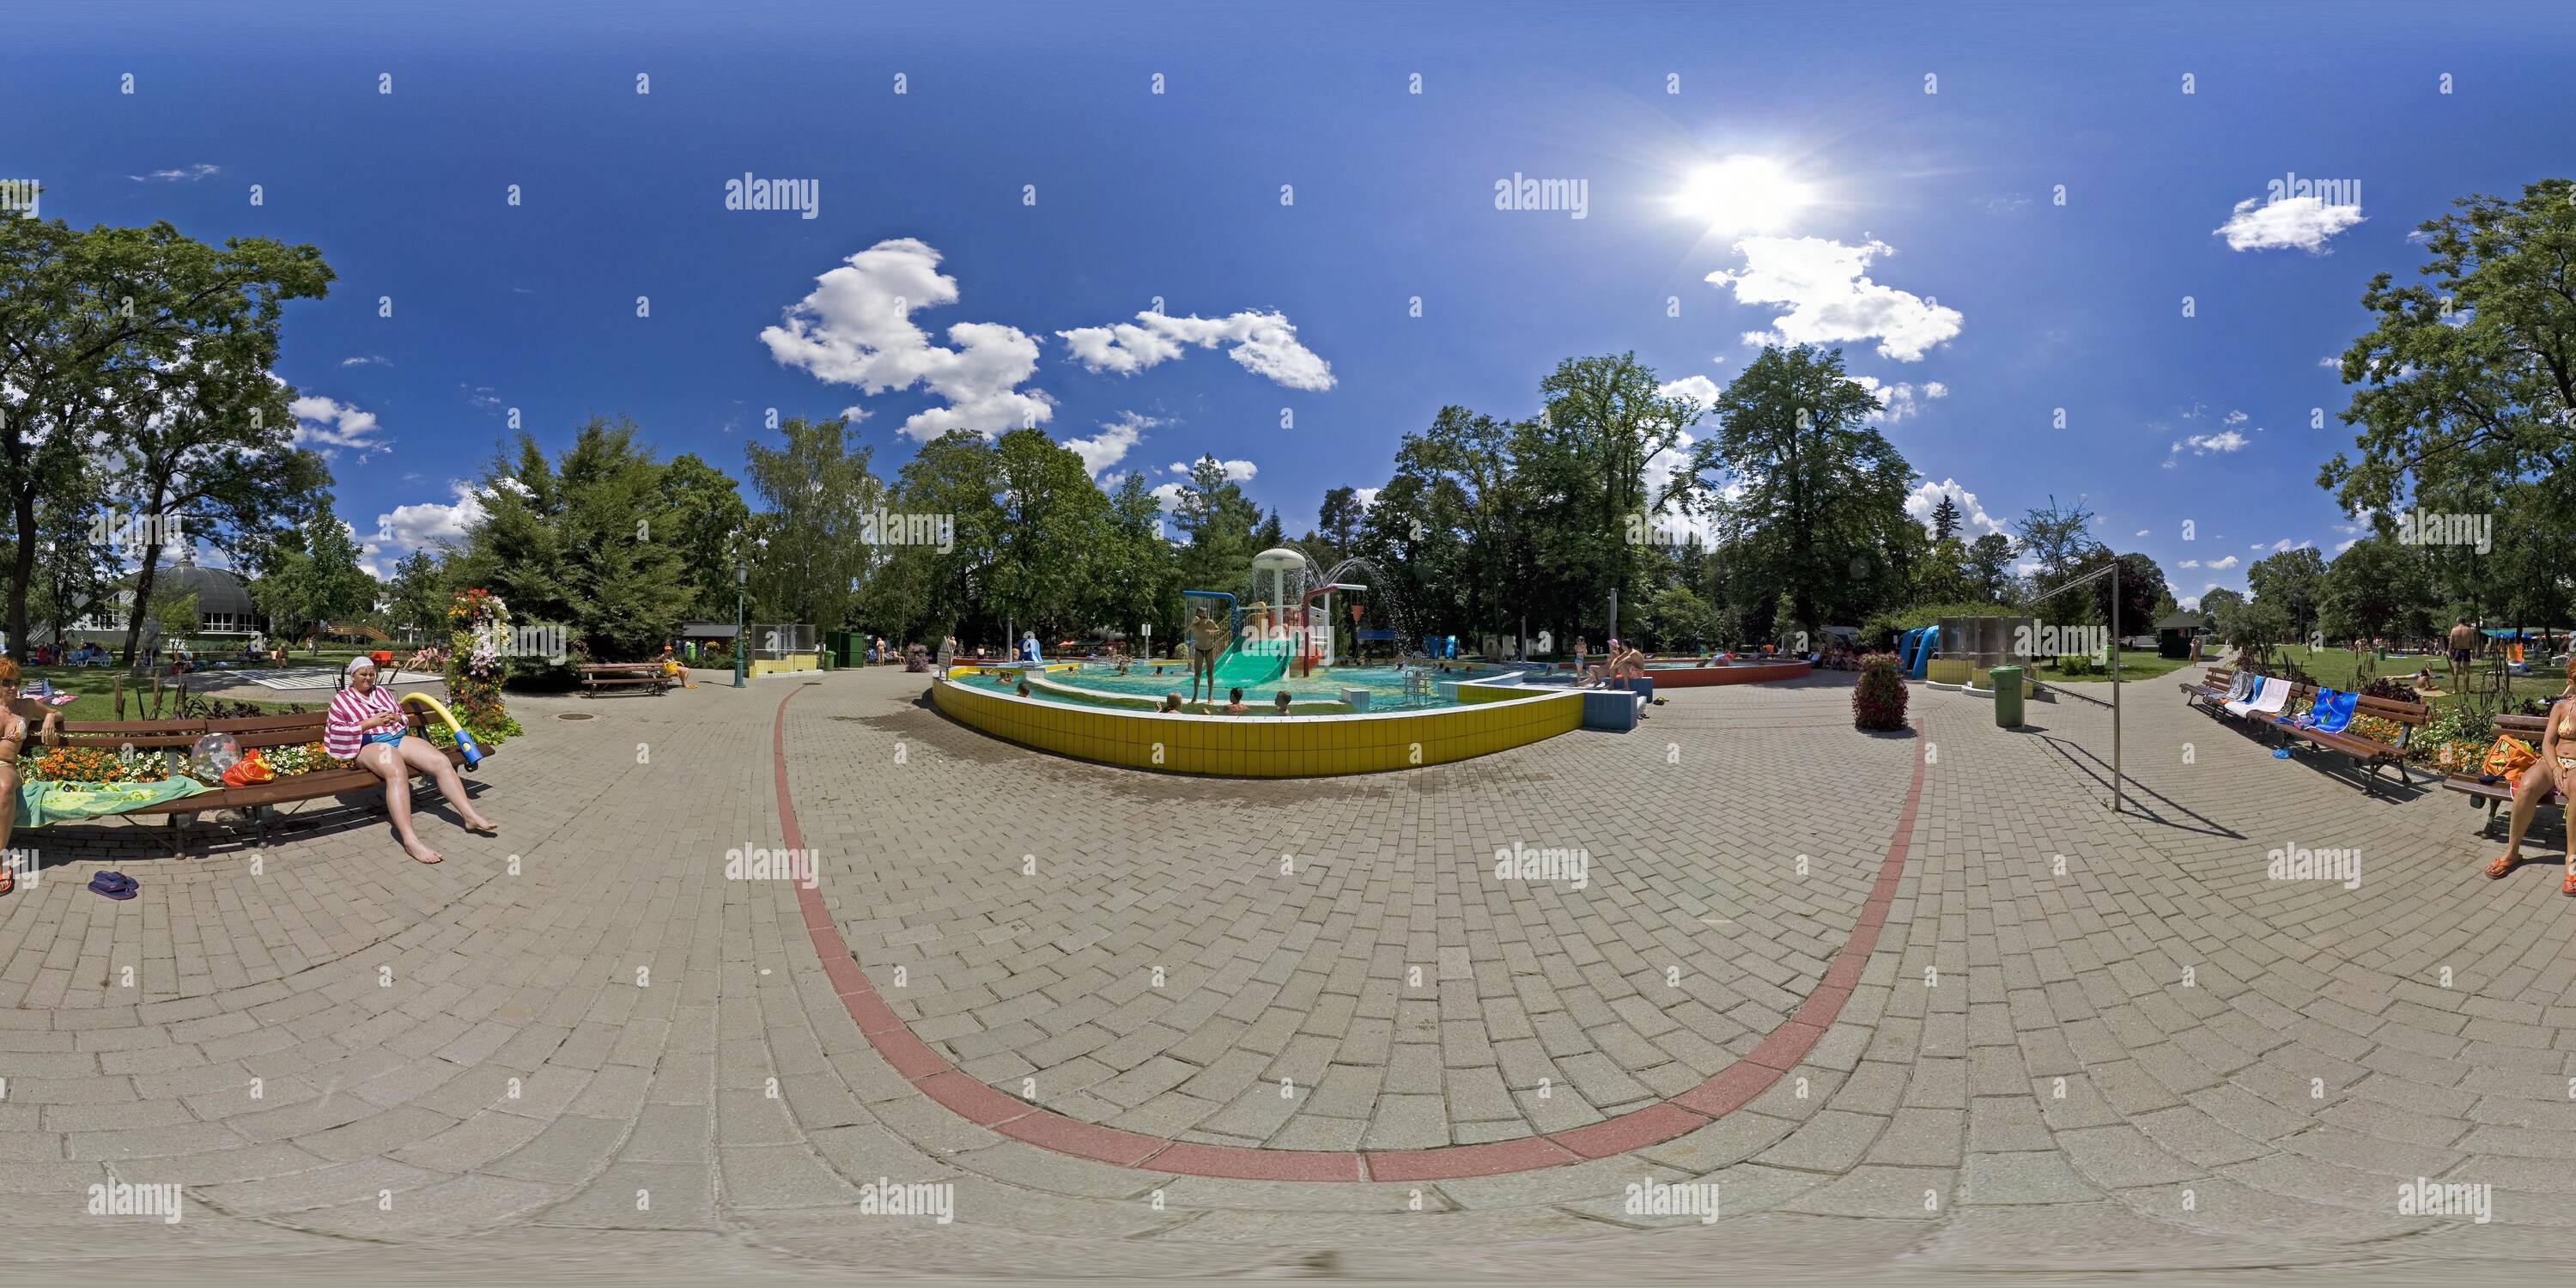 360 degree panoramic view of Castle Bath child pool